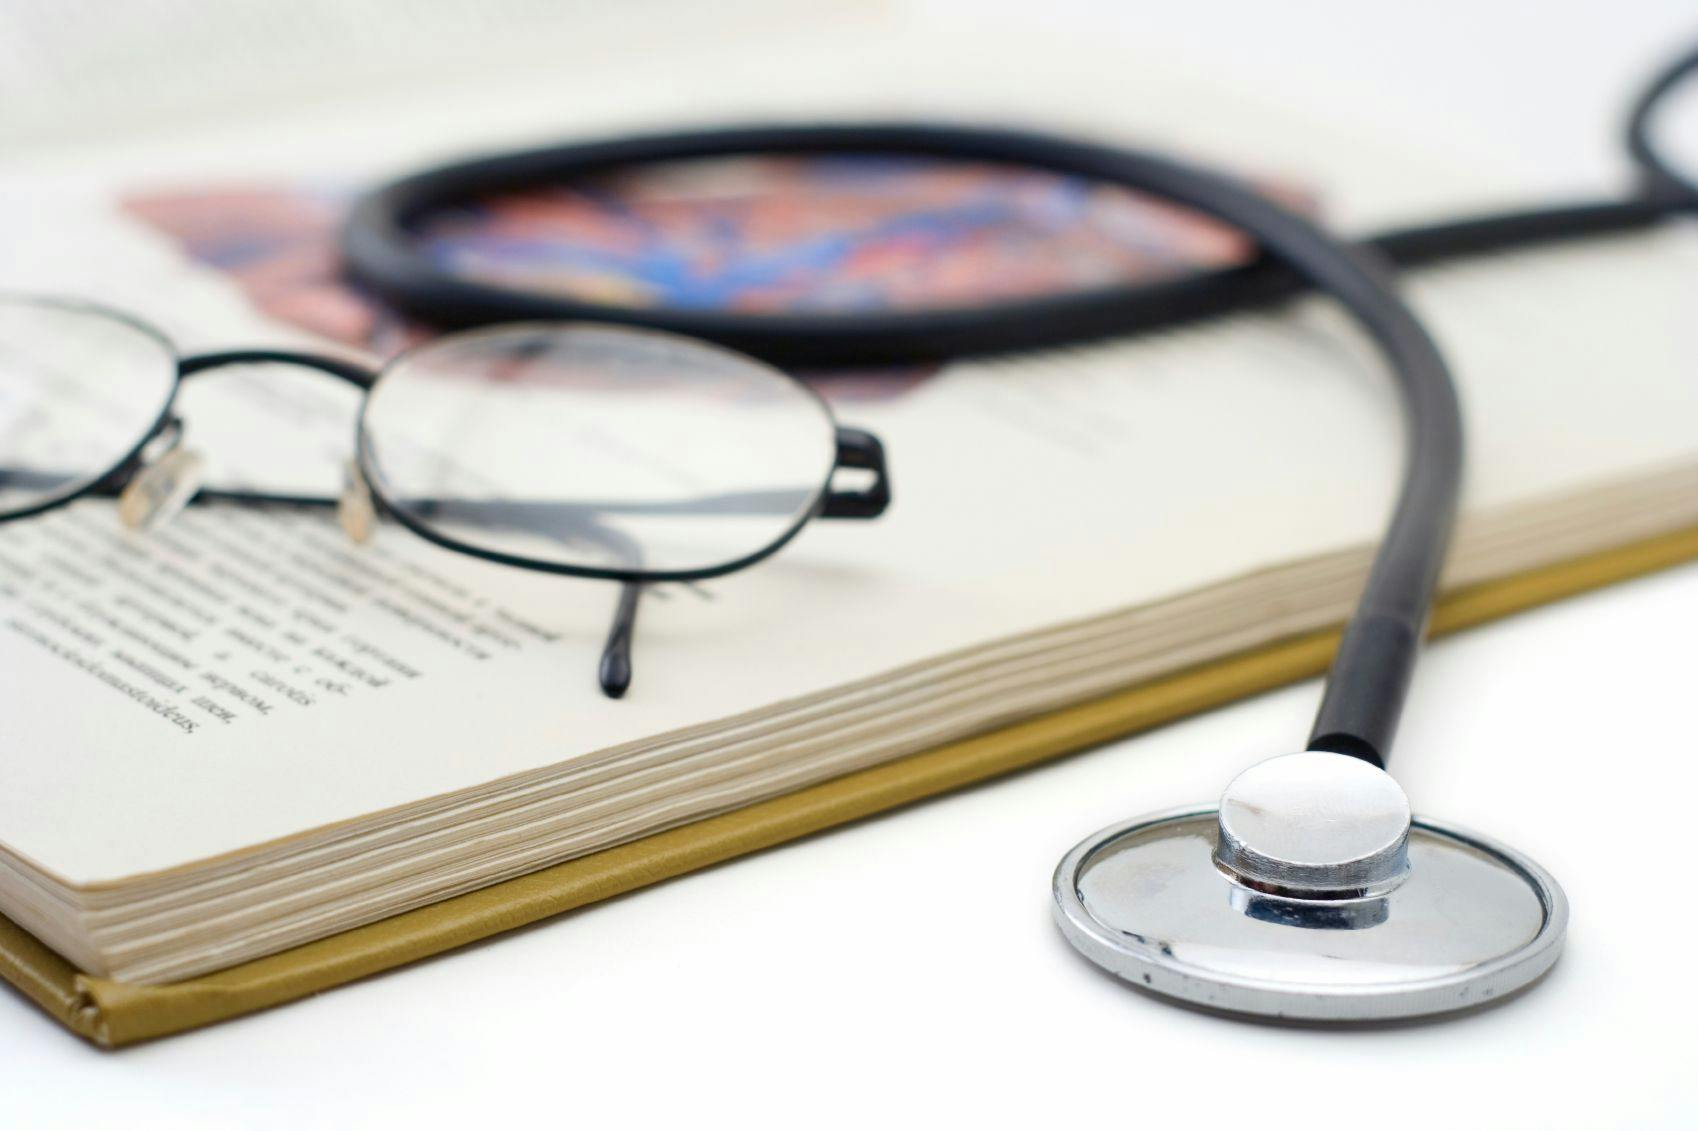 glasses and a stethoscope placed on a textbook